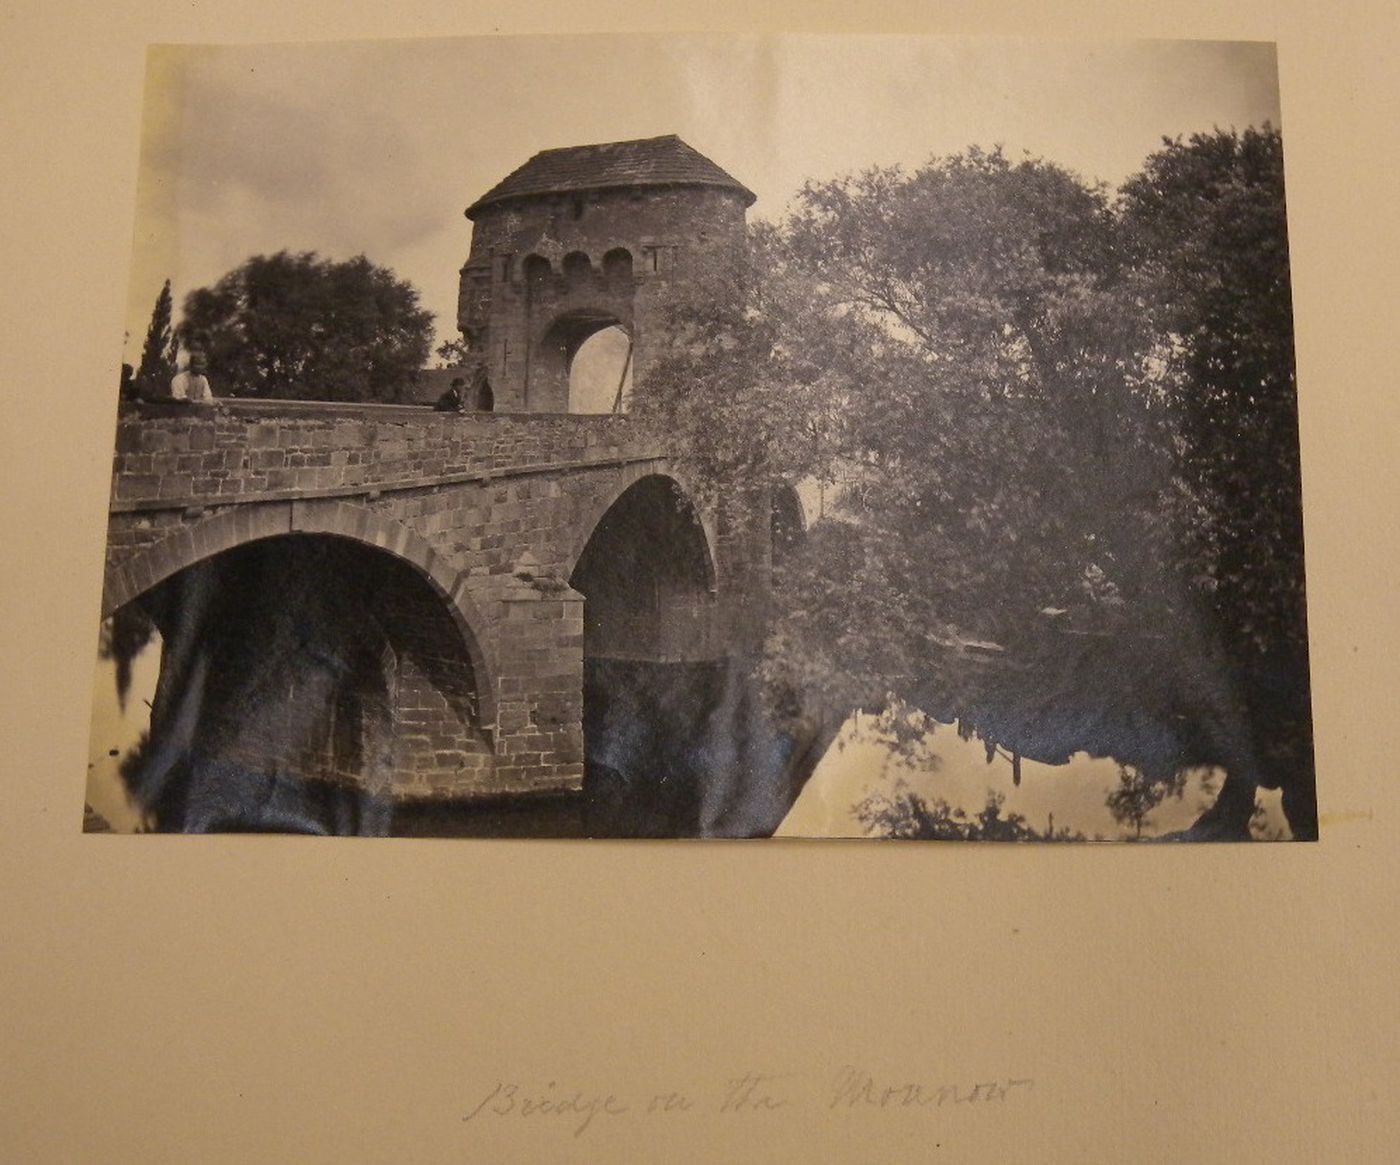 Monnow Bridge at Monmouth, Monmouthshire, Wales.